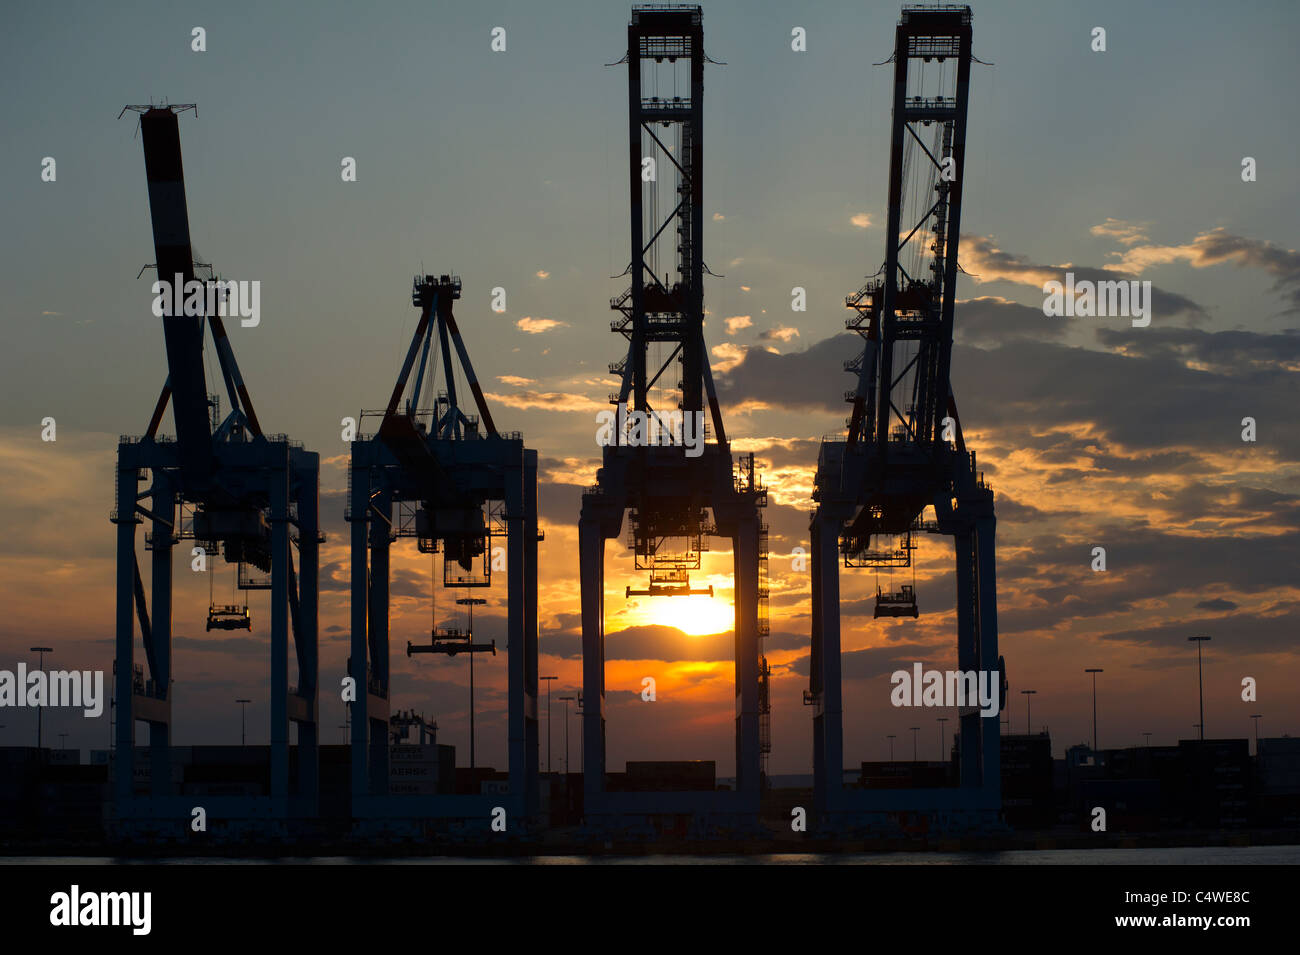 Idle cranes at the Maersk terminal in Port Elizabeth in the New York and New Jersey harbor Stock Photo